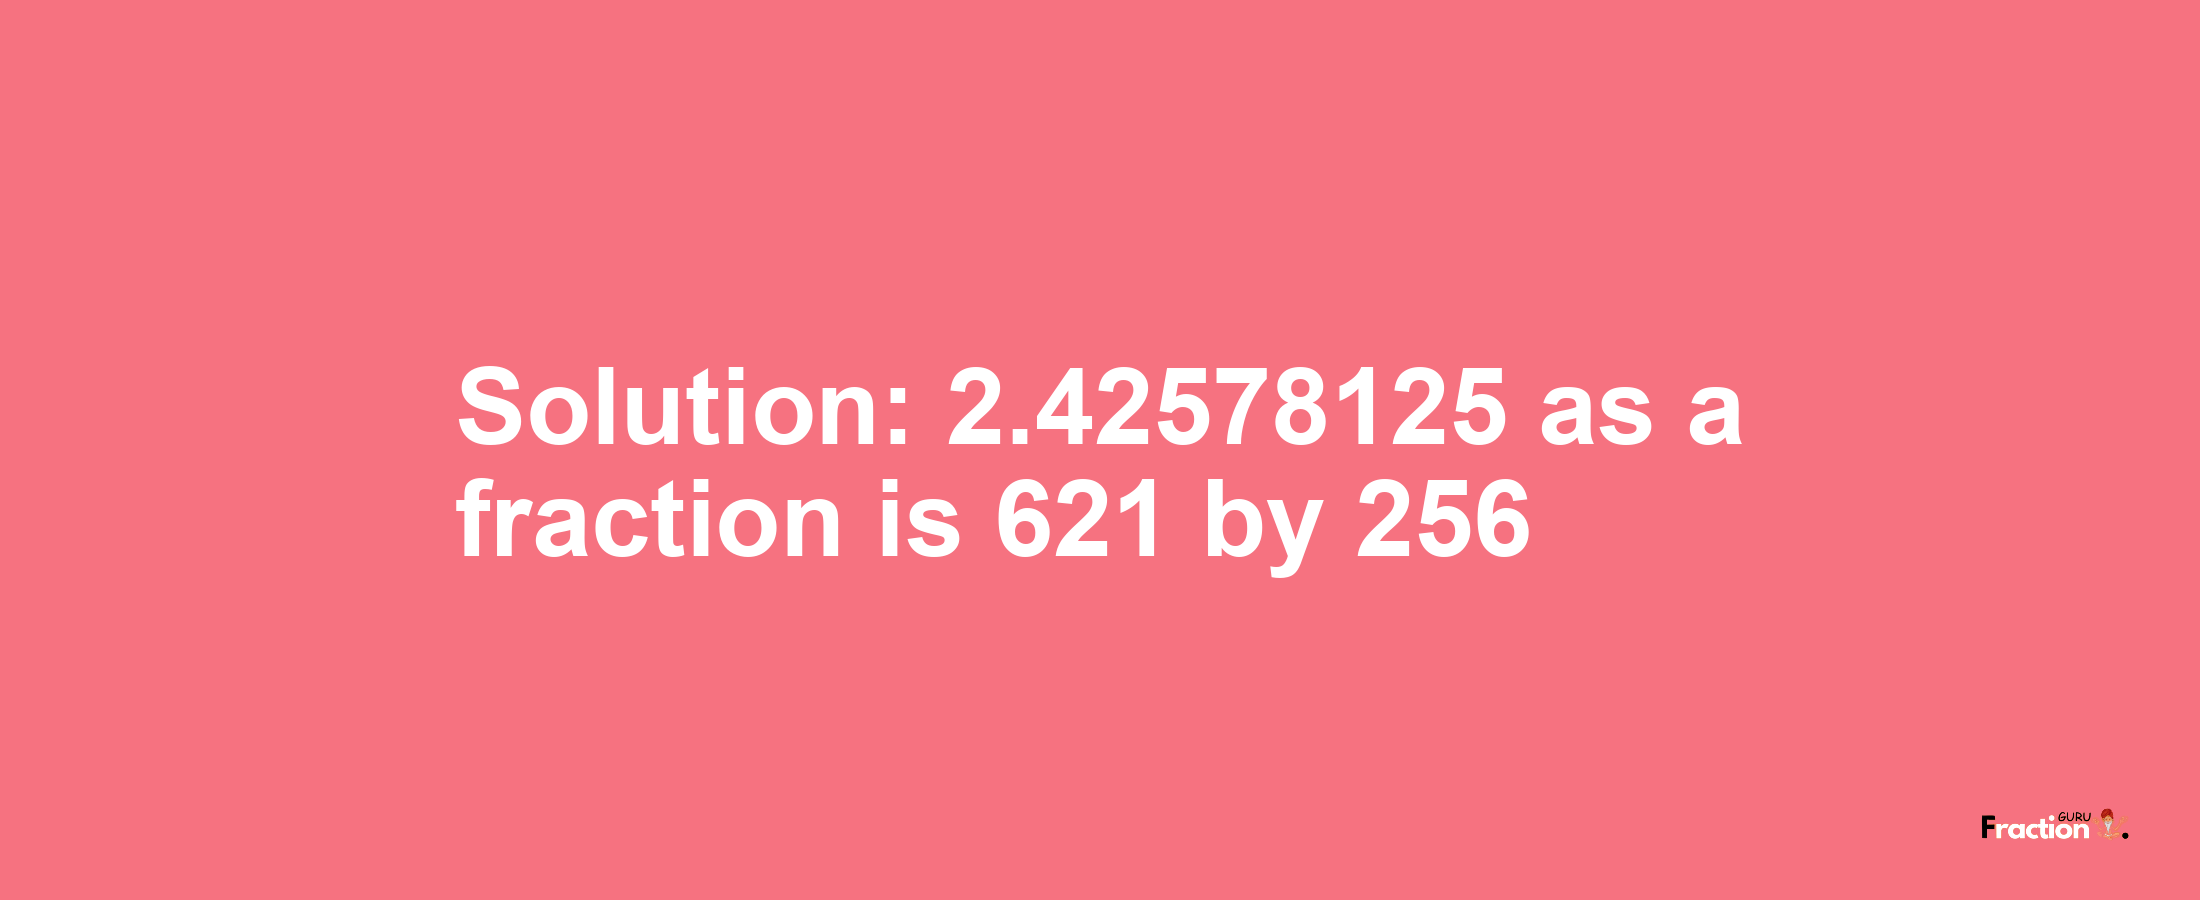 Solution:2.42578125 as a fraction is 621/256